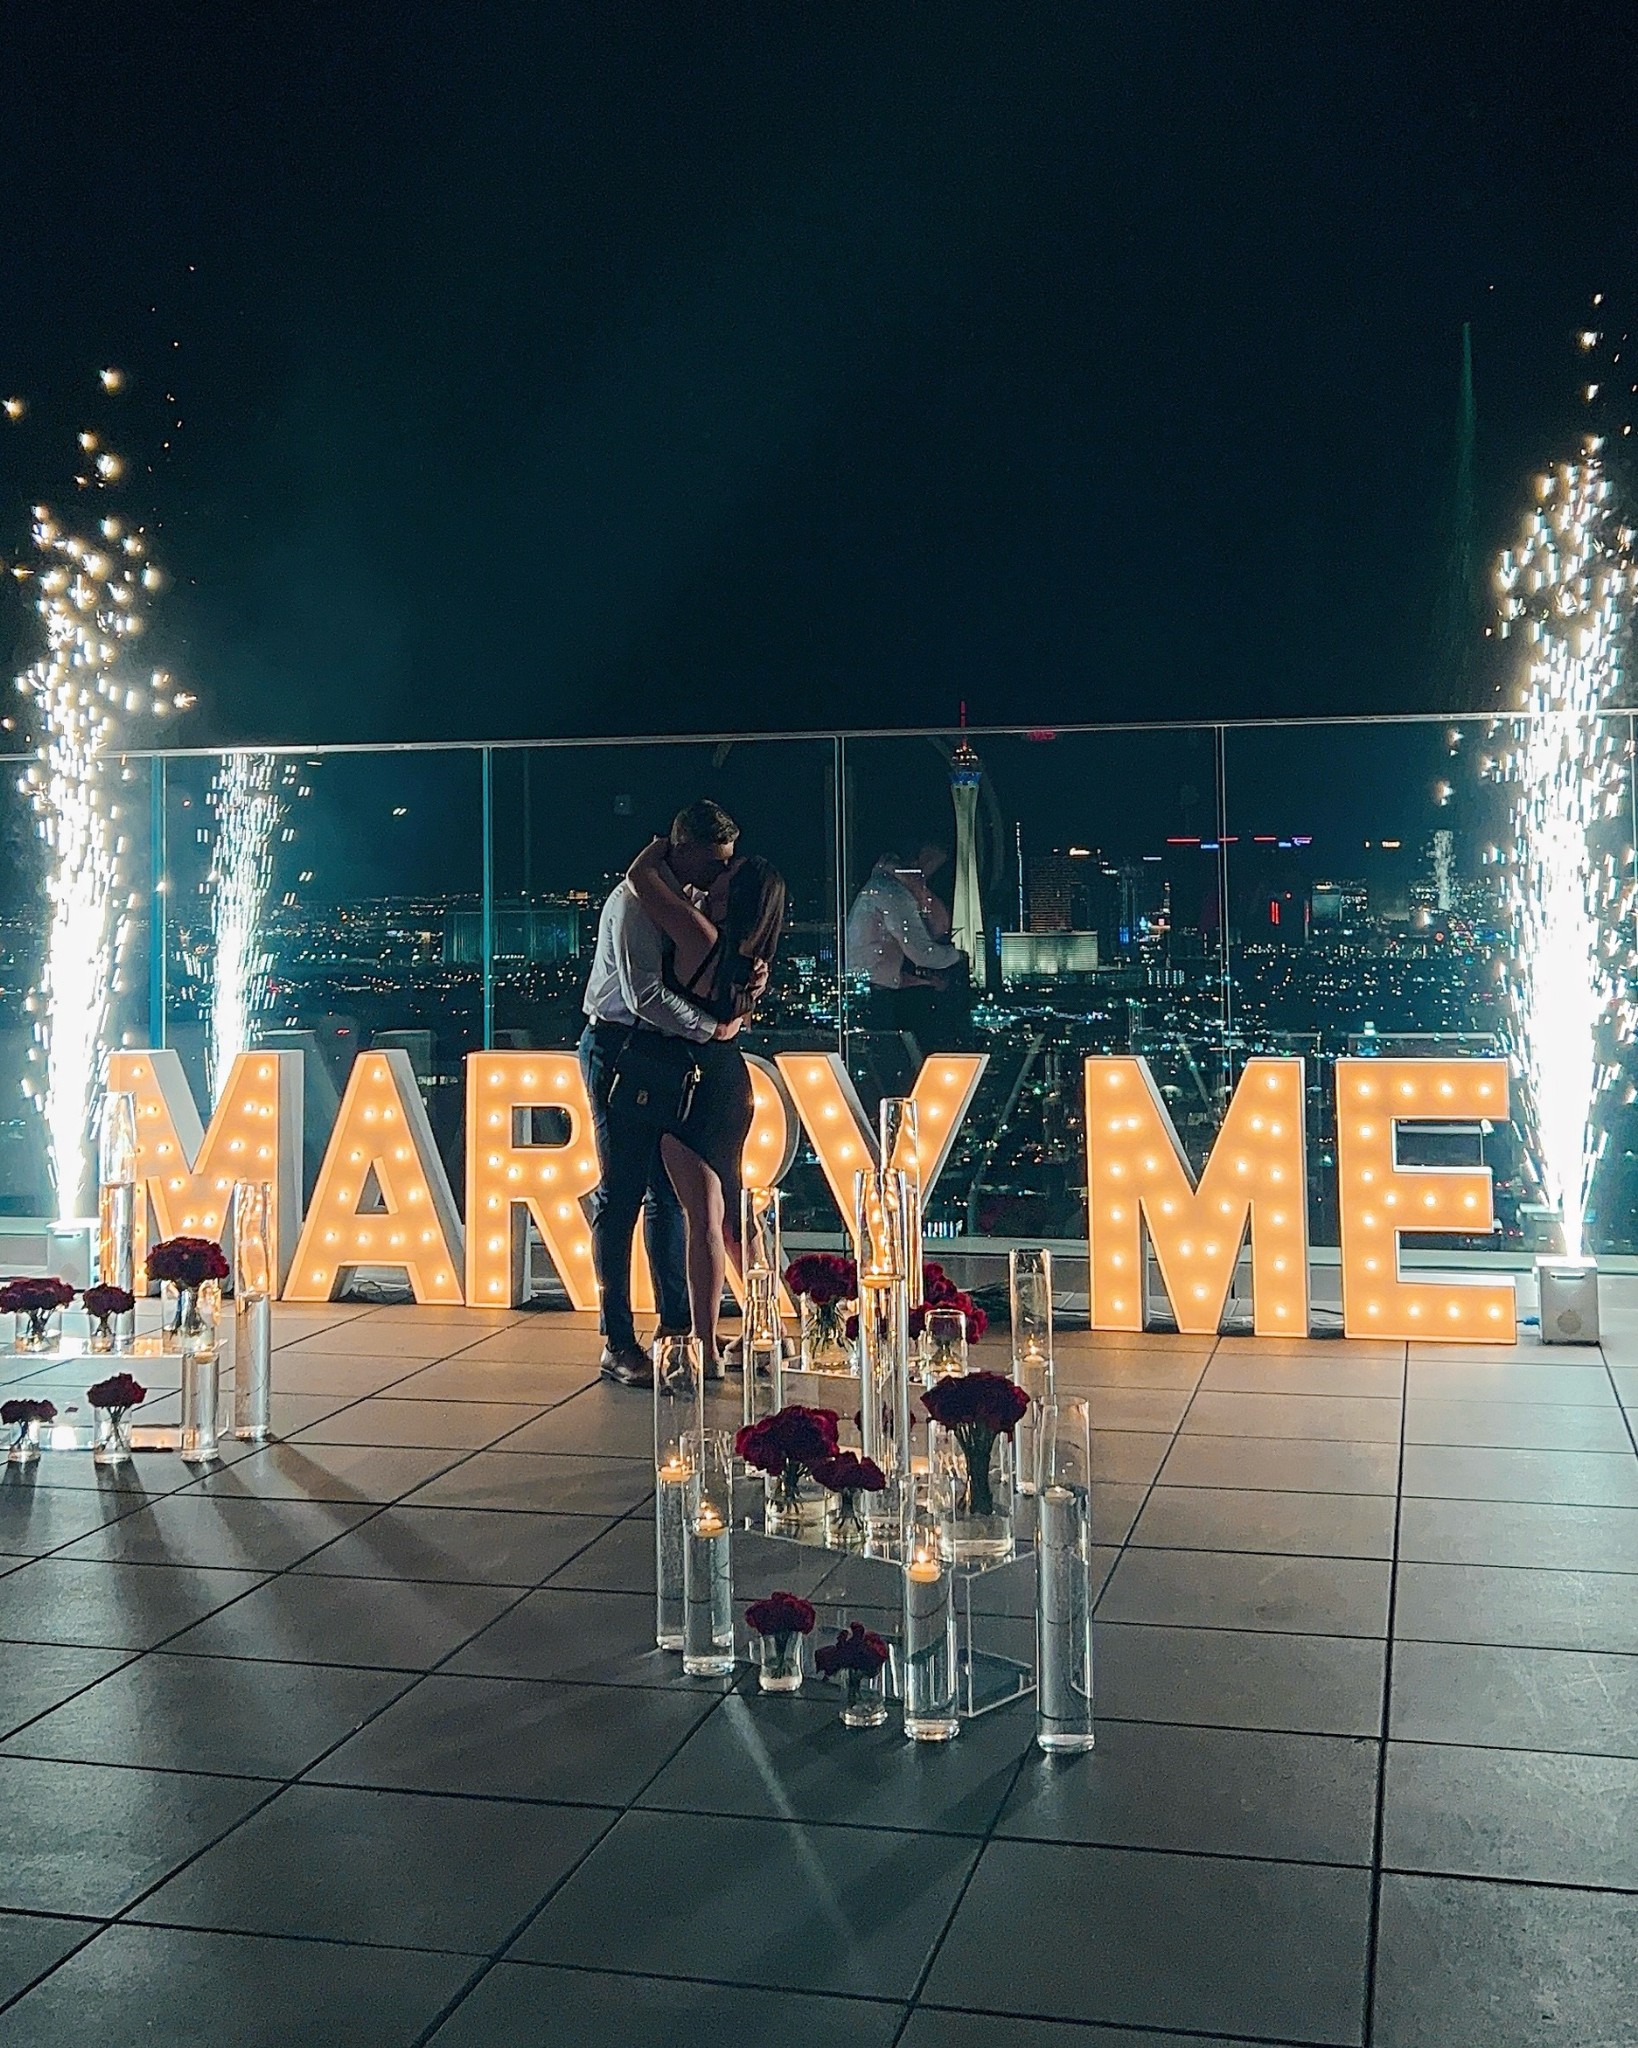 outdoor wedding proposal las vegas strip view rooftop balcony marry me light sign and sparkler foundations